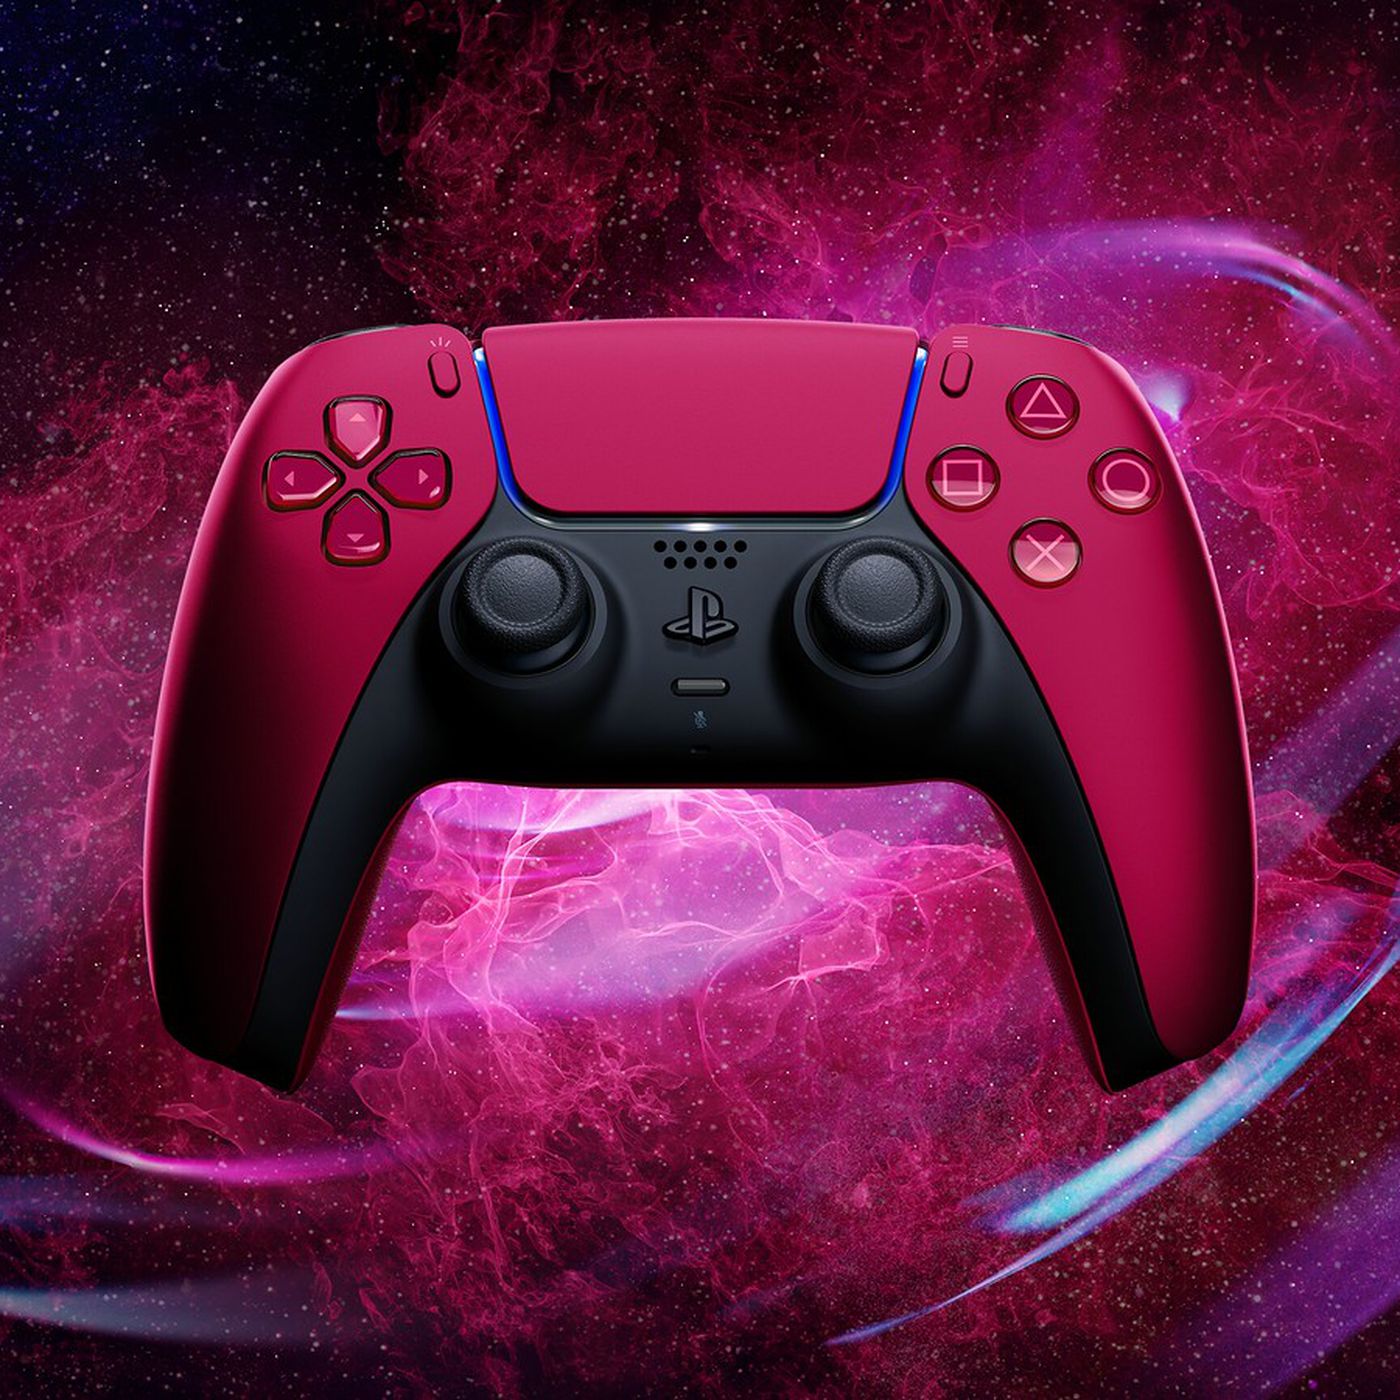 Where to preorder the black and red DualSense controllers for the PS5